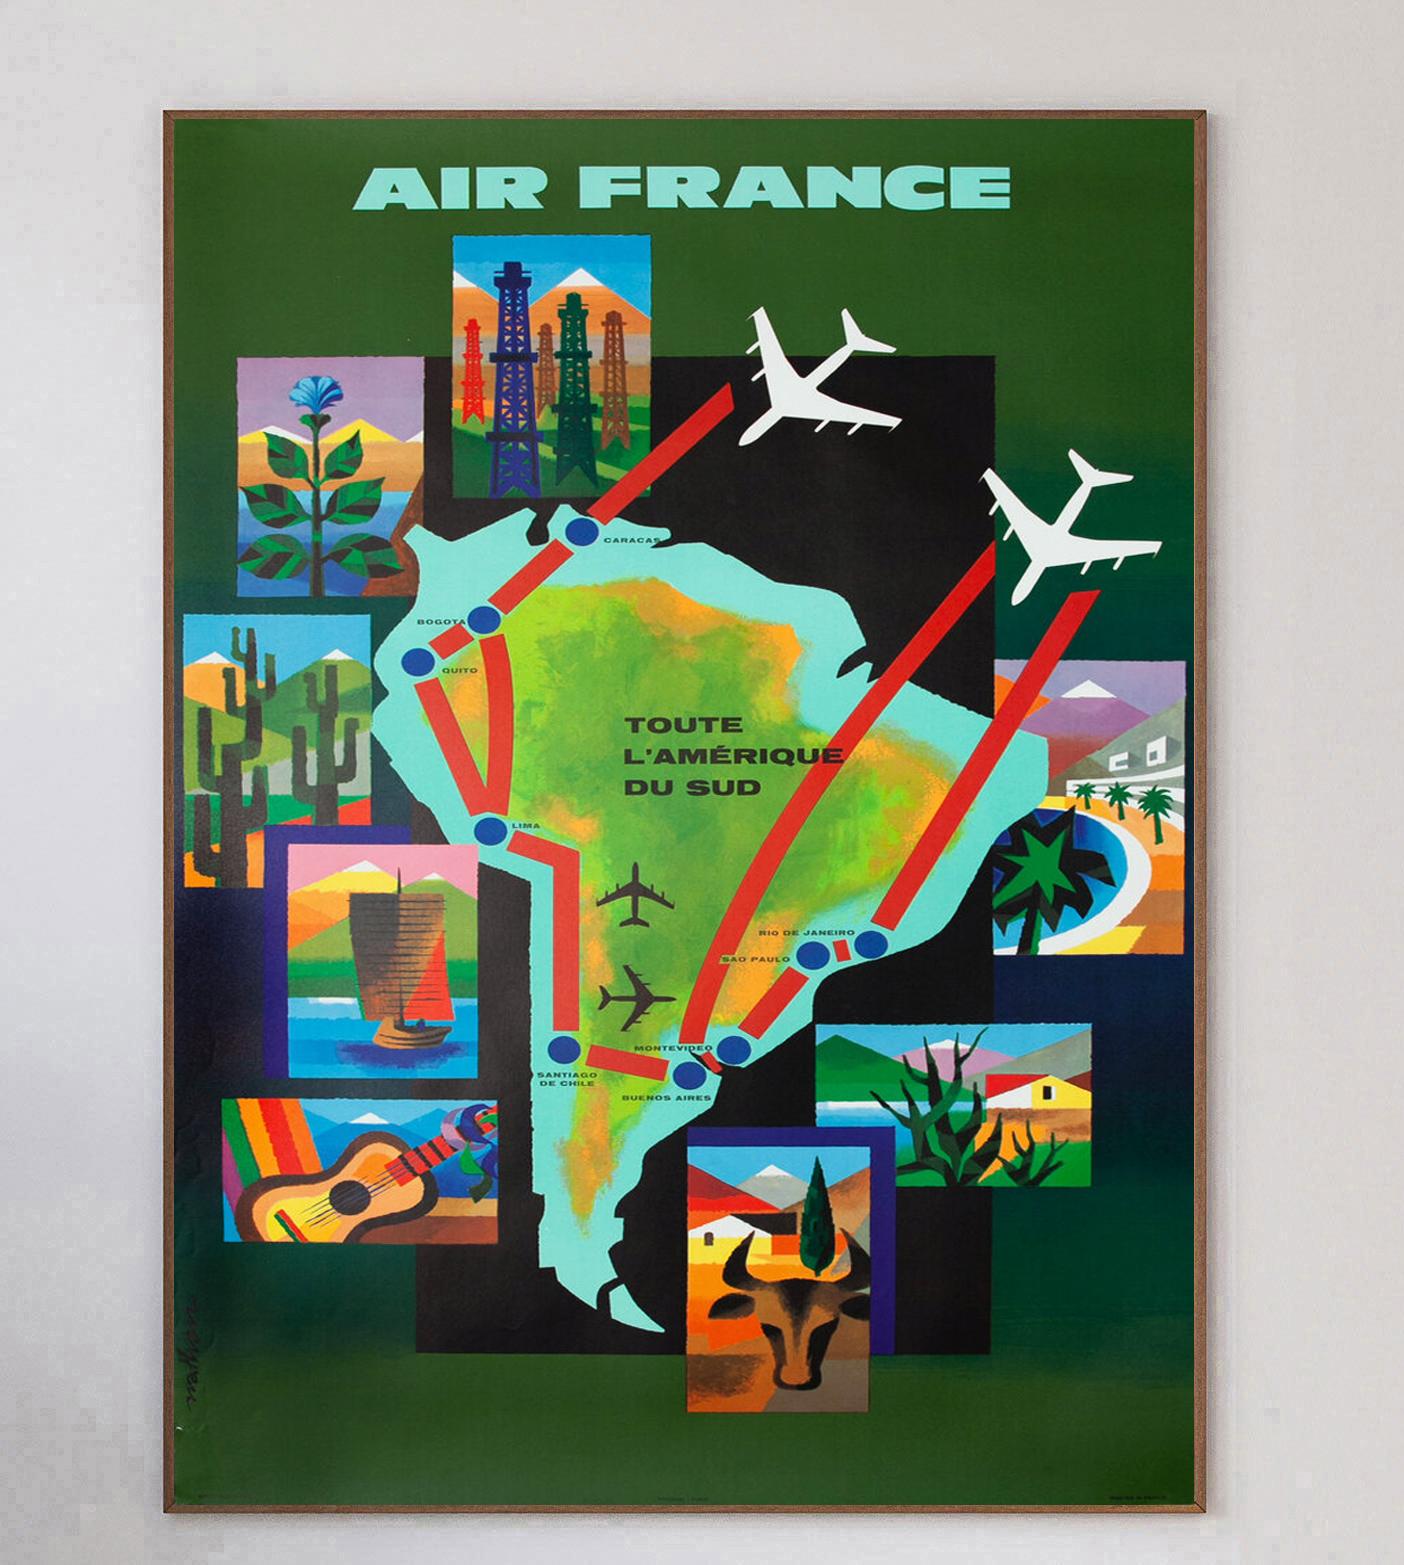 With fabulous artwork from French artist Nathan (Jacques Nathan-Garamond) who worked on several Air France posters of the era, this poster promoting the airlines routes to South America was created in 1965. Air France was created in 1933 after a